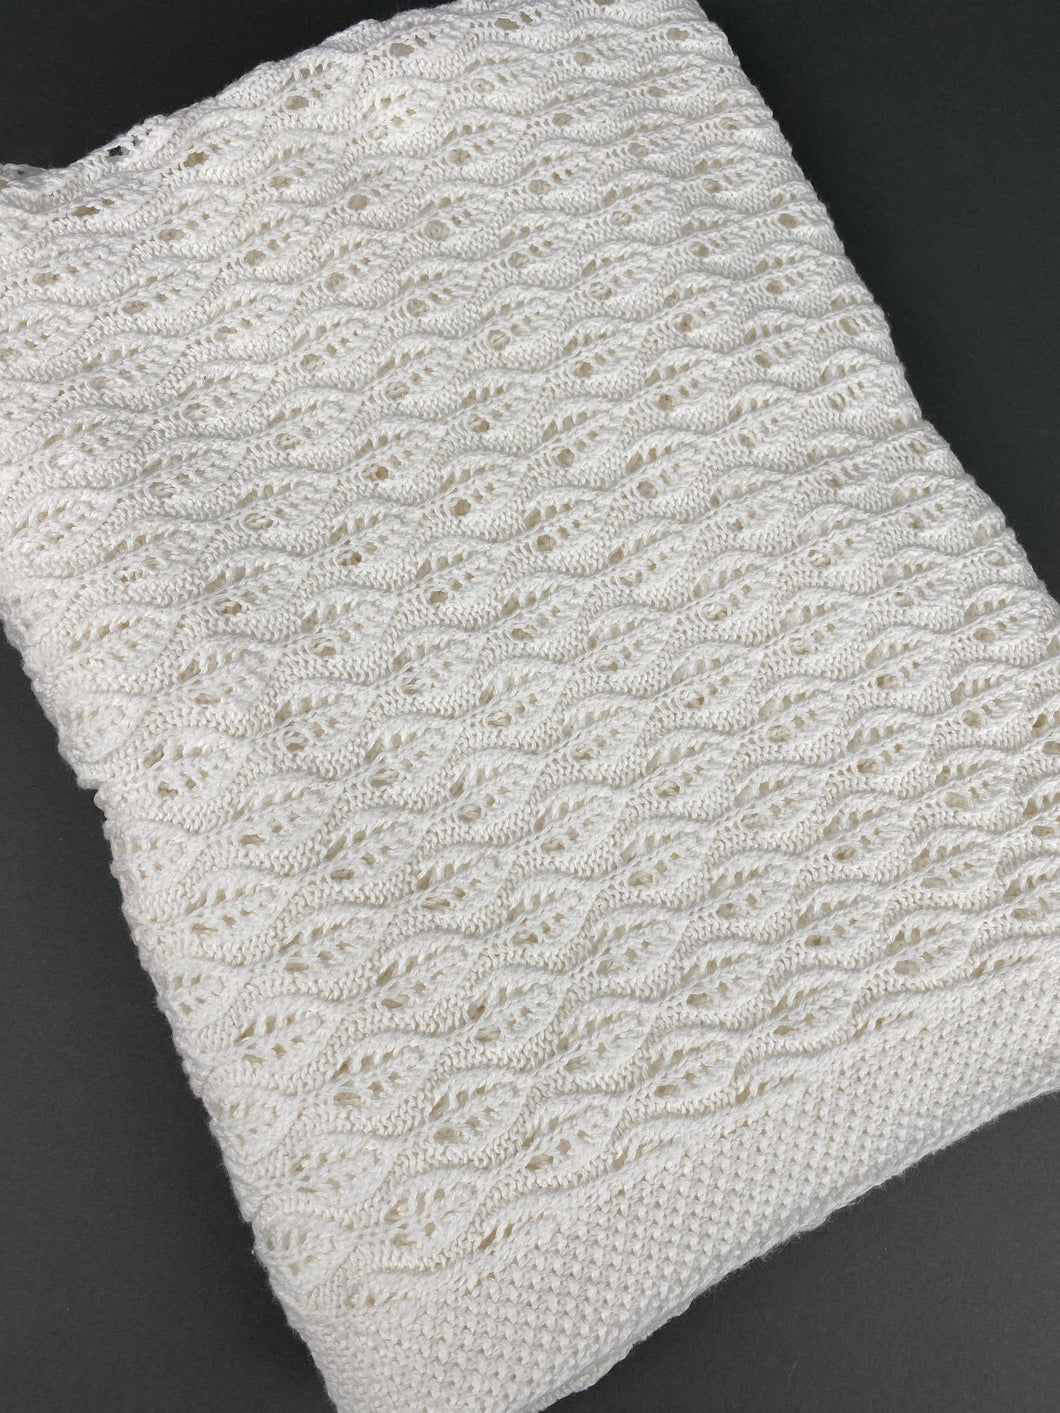 White Knitted Blanket 100% Cotton WB3